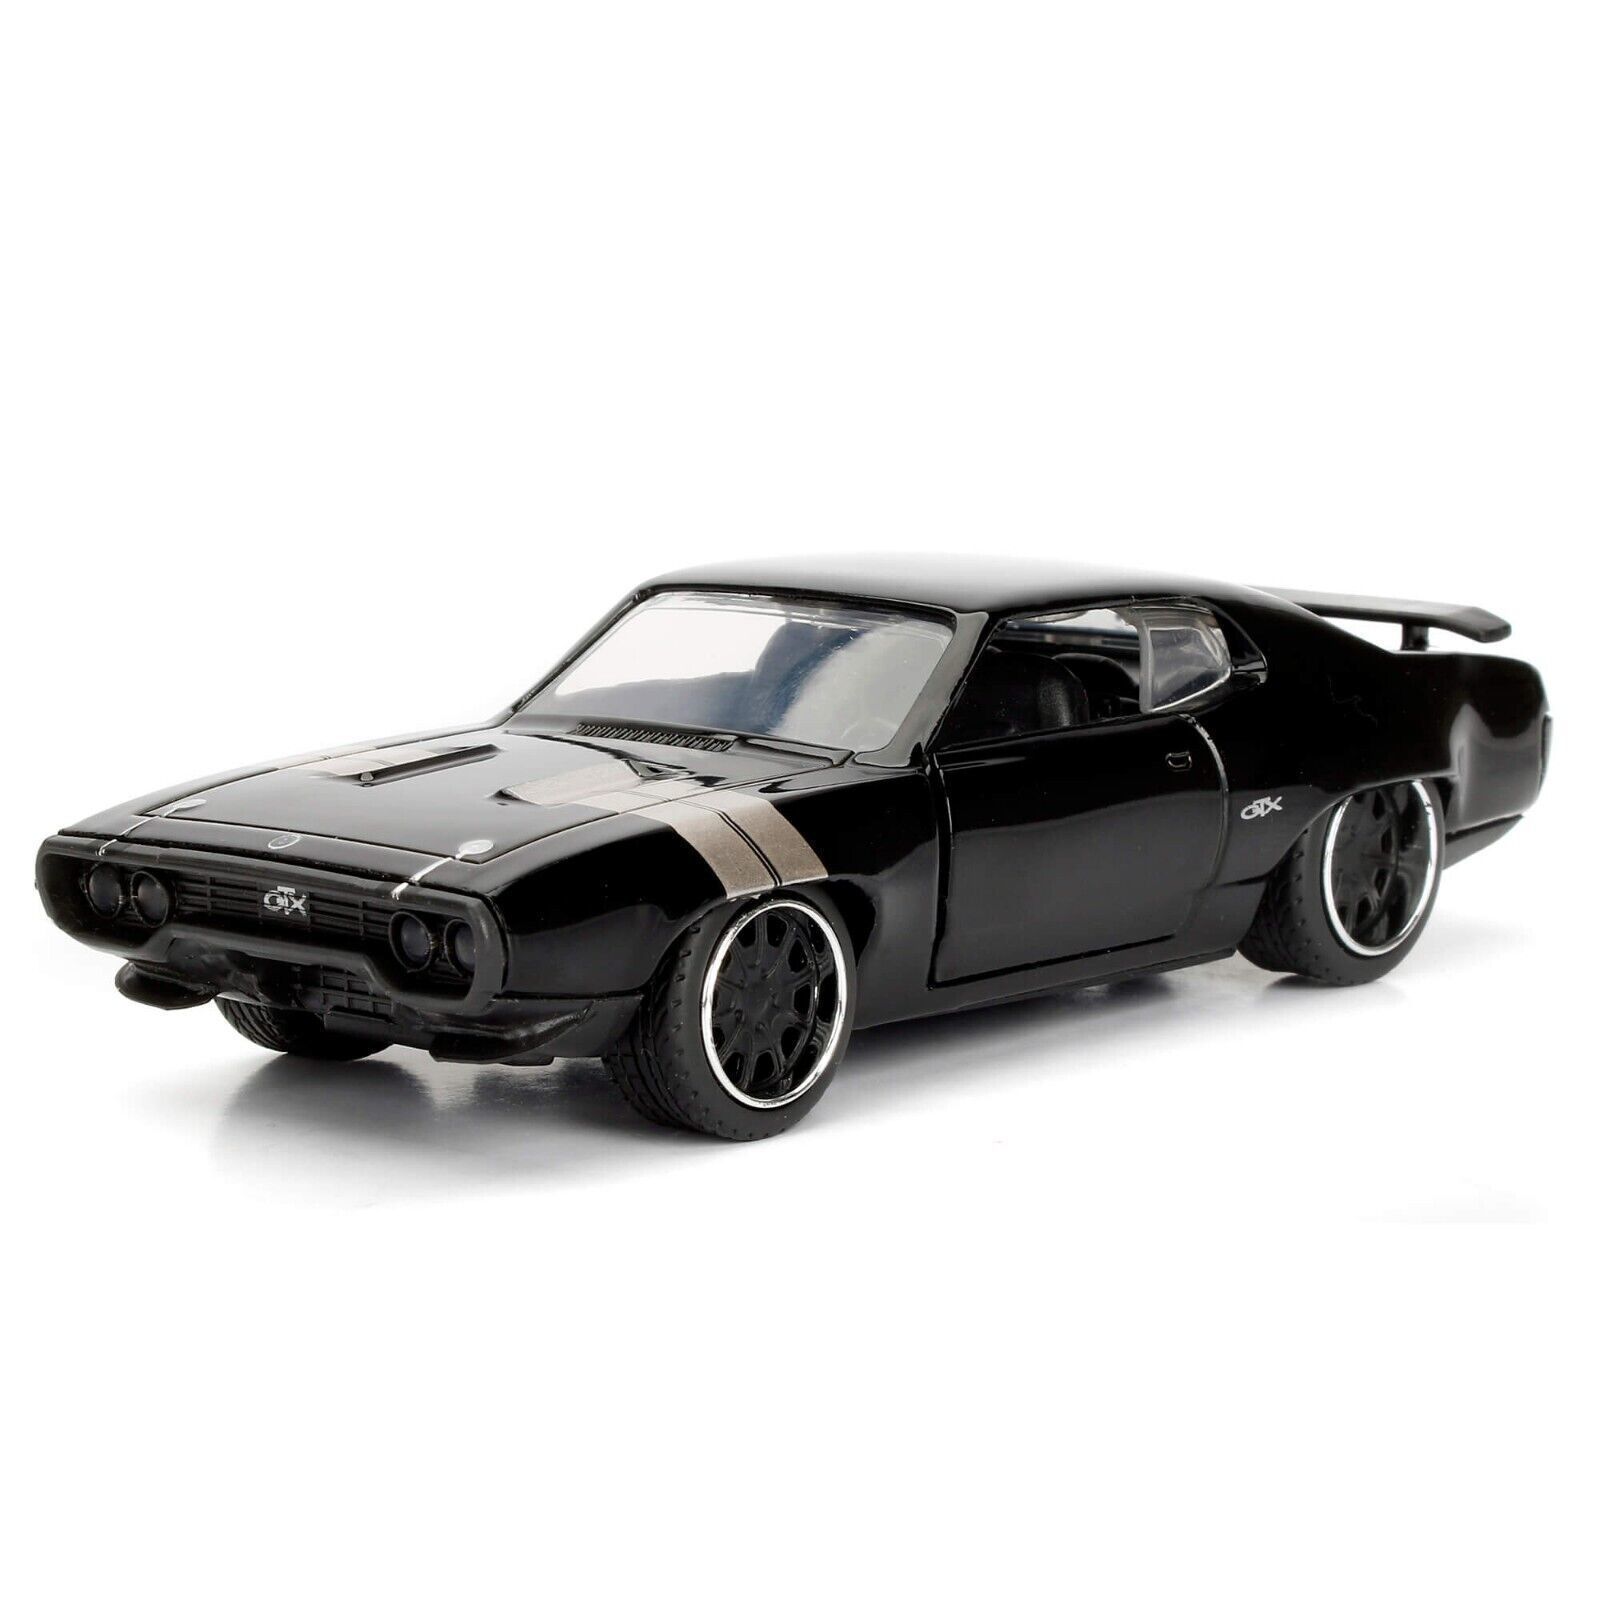 Primary image for JADA JAD98300 1/32 1971 PLYMOUTH GTX DOM'S FAST AND FURIOUS 8 - IN STOCK

The ph